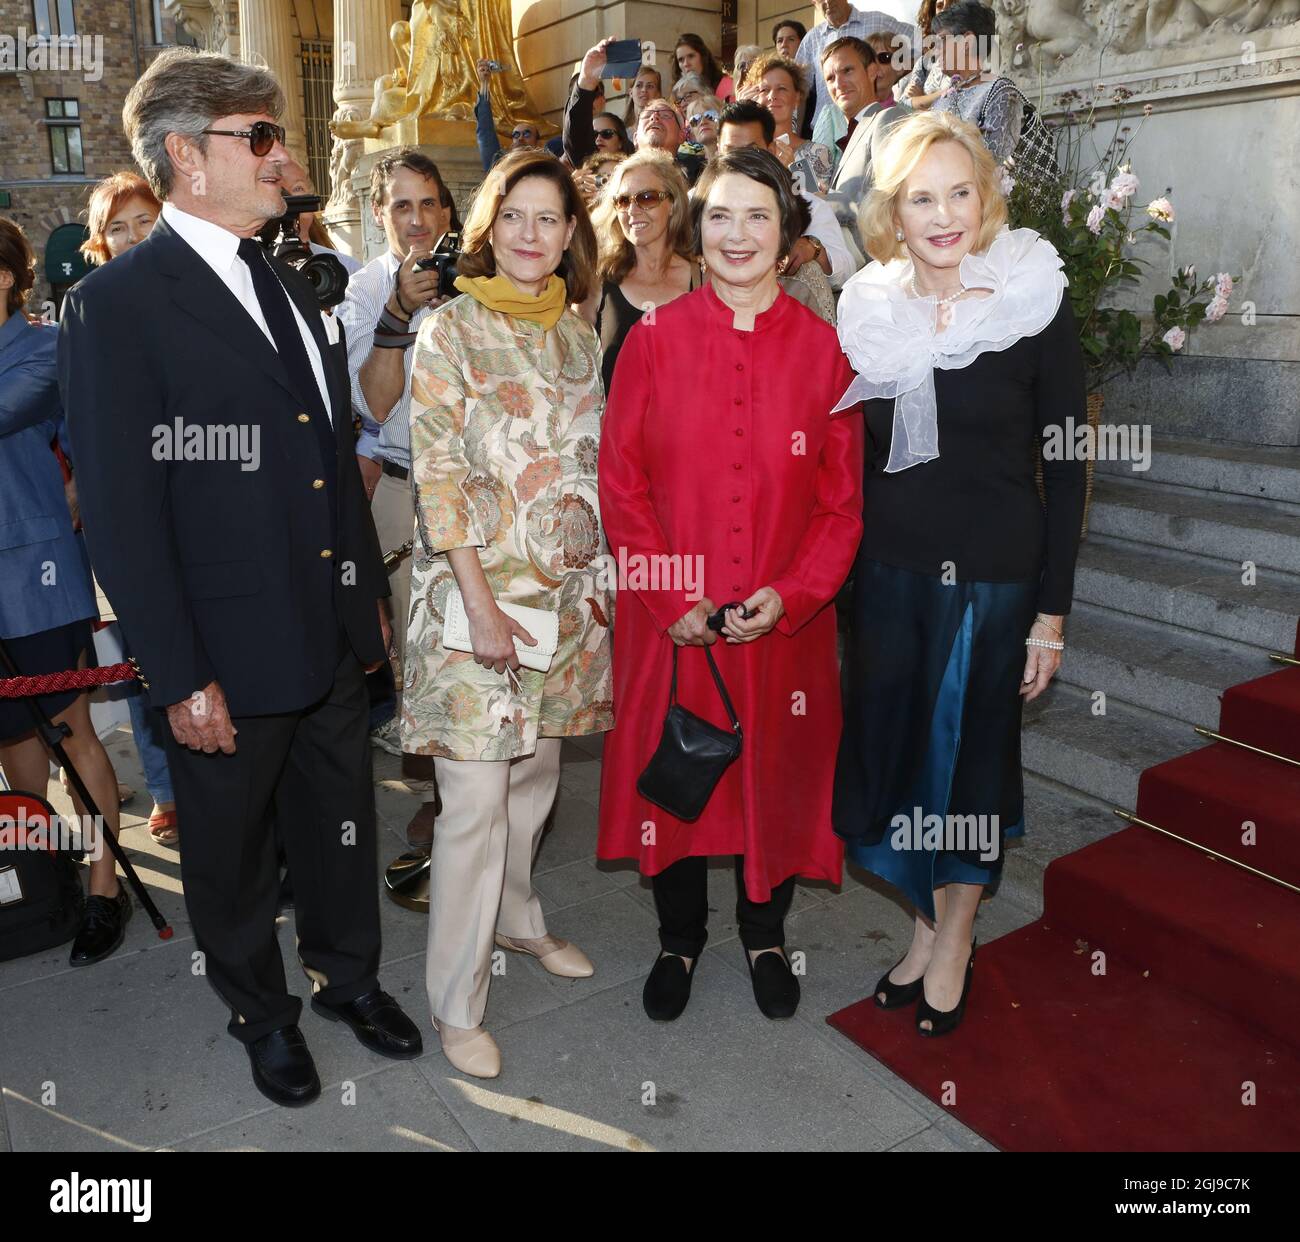 Actress Ingrid Bergman's four children (L-R) Roberto Rossellini, Ingrid Rossellini, Isabella Rossellini and Pia Lindstrom arrive at Dramaten Theatre in Stockholm, Sweden, on Aug. 24, 2015, for the Swedish premiere of the documentary 'Ingrid Bergman: In Her Own Words' on the occasion of the 100 anniversary gala of the birth of the late Swedish actress Ingrid Bergman. Photo: Christine Olsson / TT / code 10430  Stock Photo